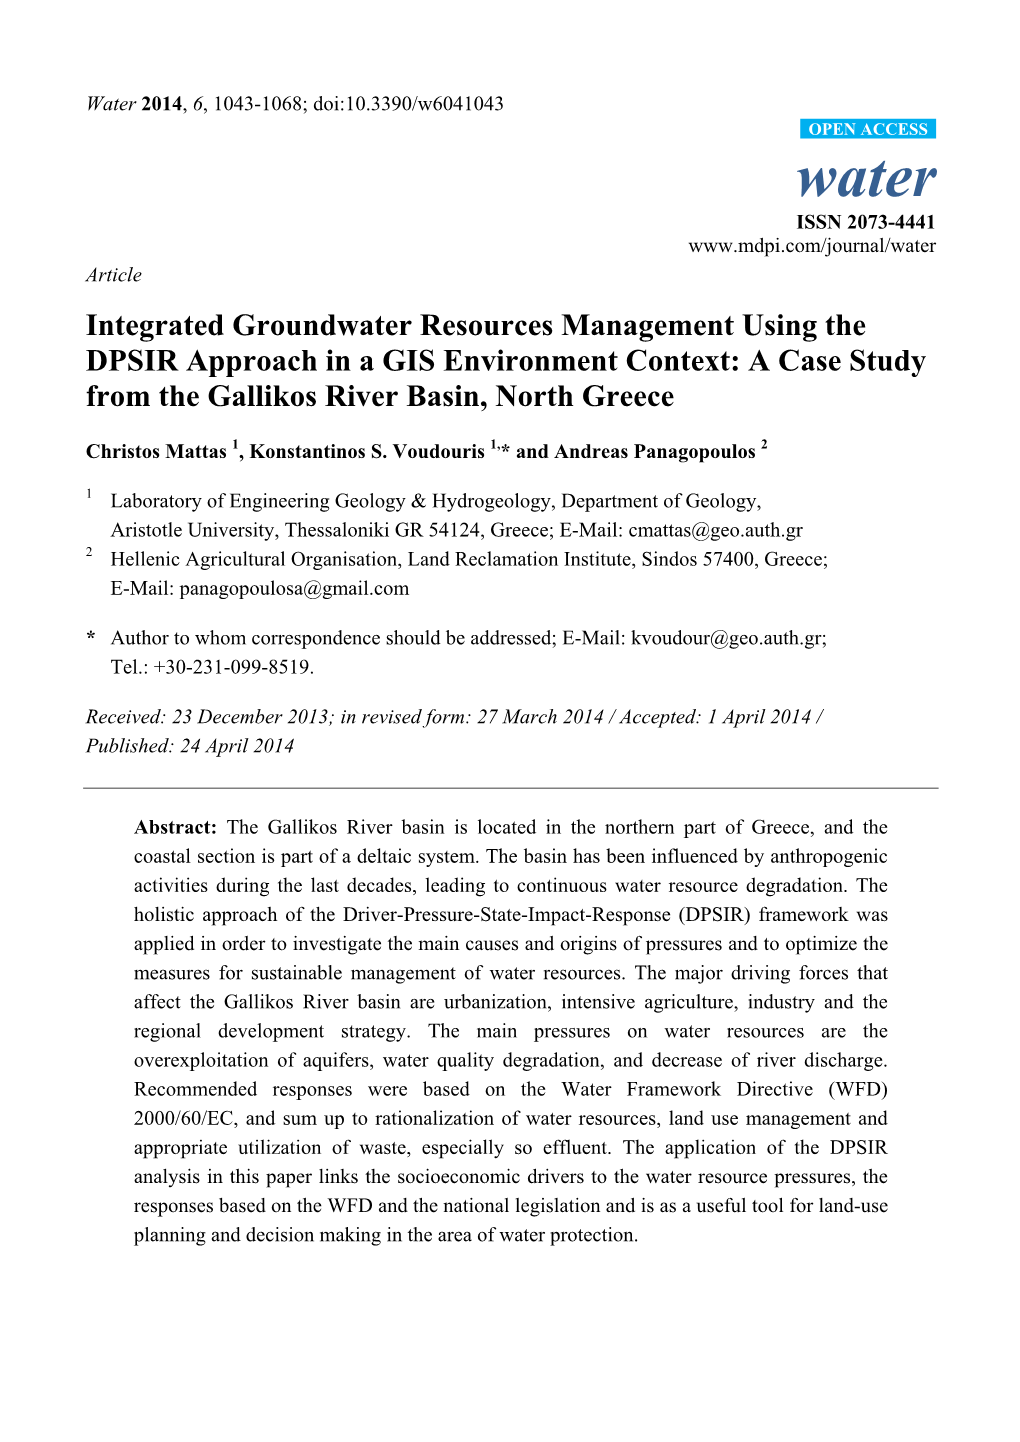 Integrated Groundwater Resources Management Using the DPSIR Approach in a GIS Environment Context: a Case Study from the Gallikos River Basin, North Greece